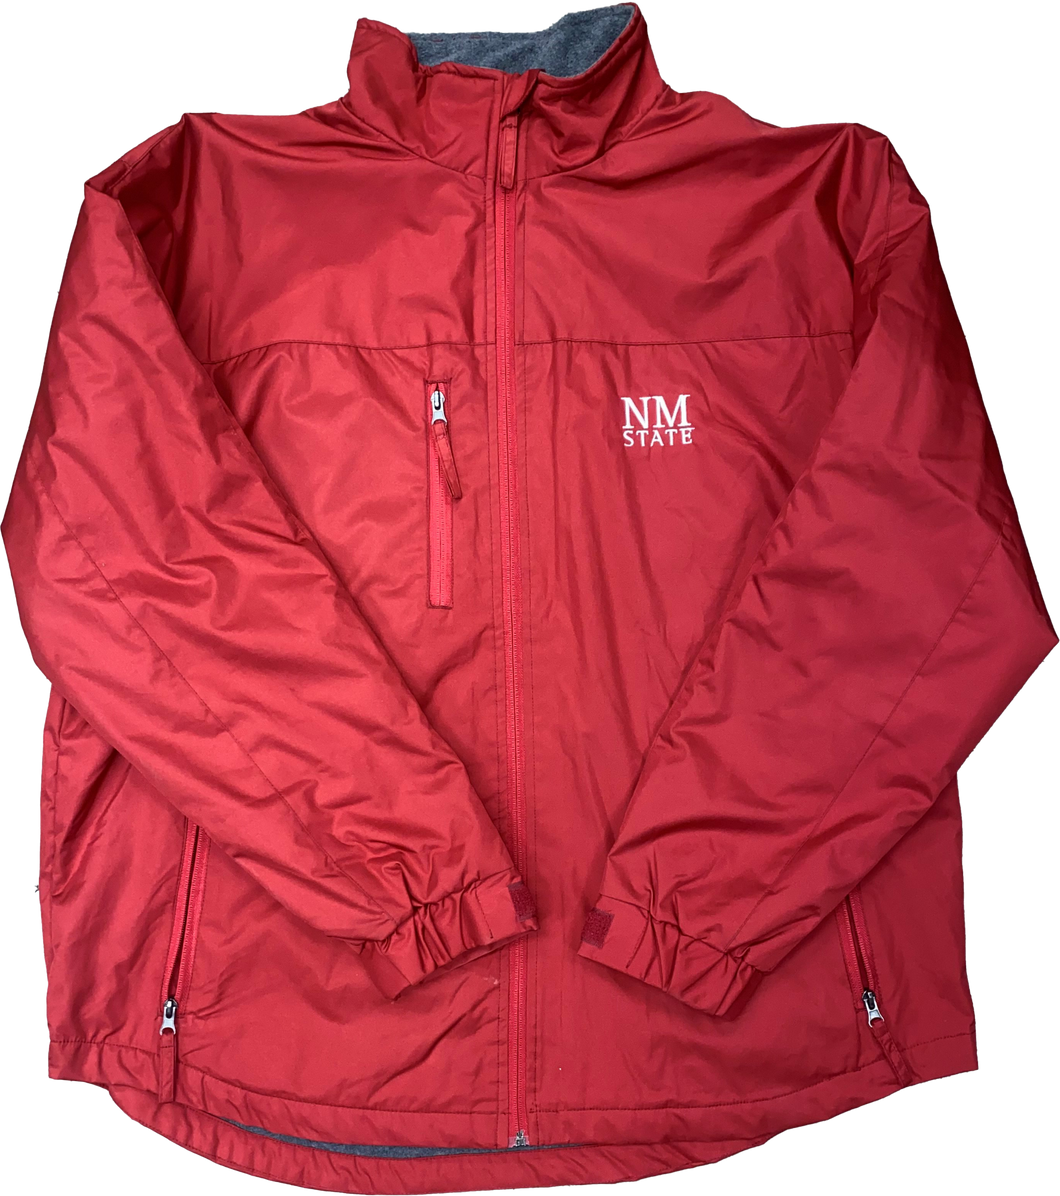 NM State Fleece Lined Drop Tail Jacket